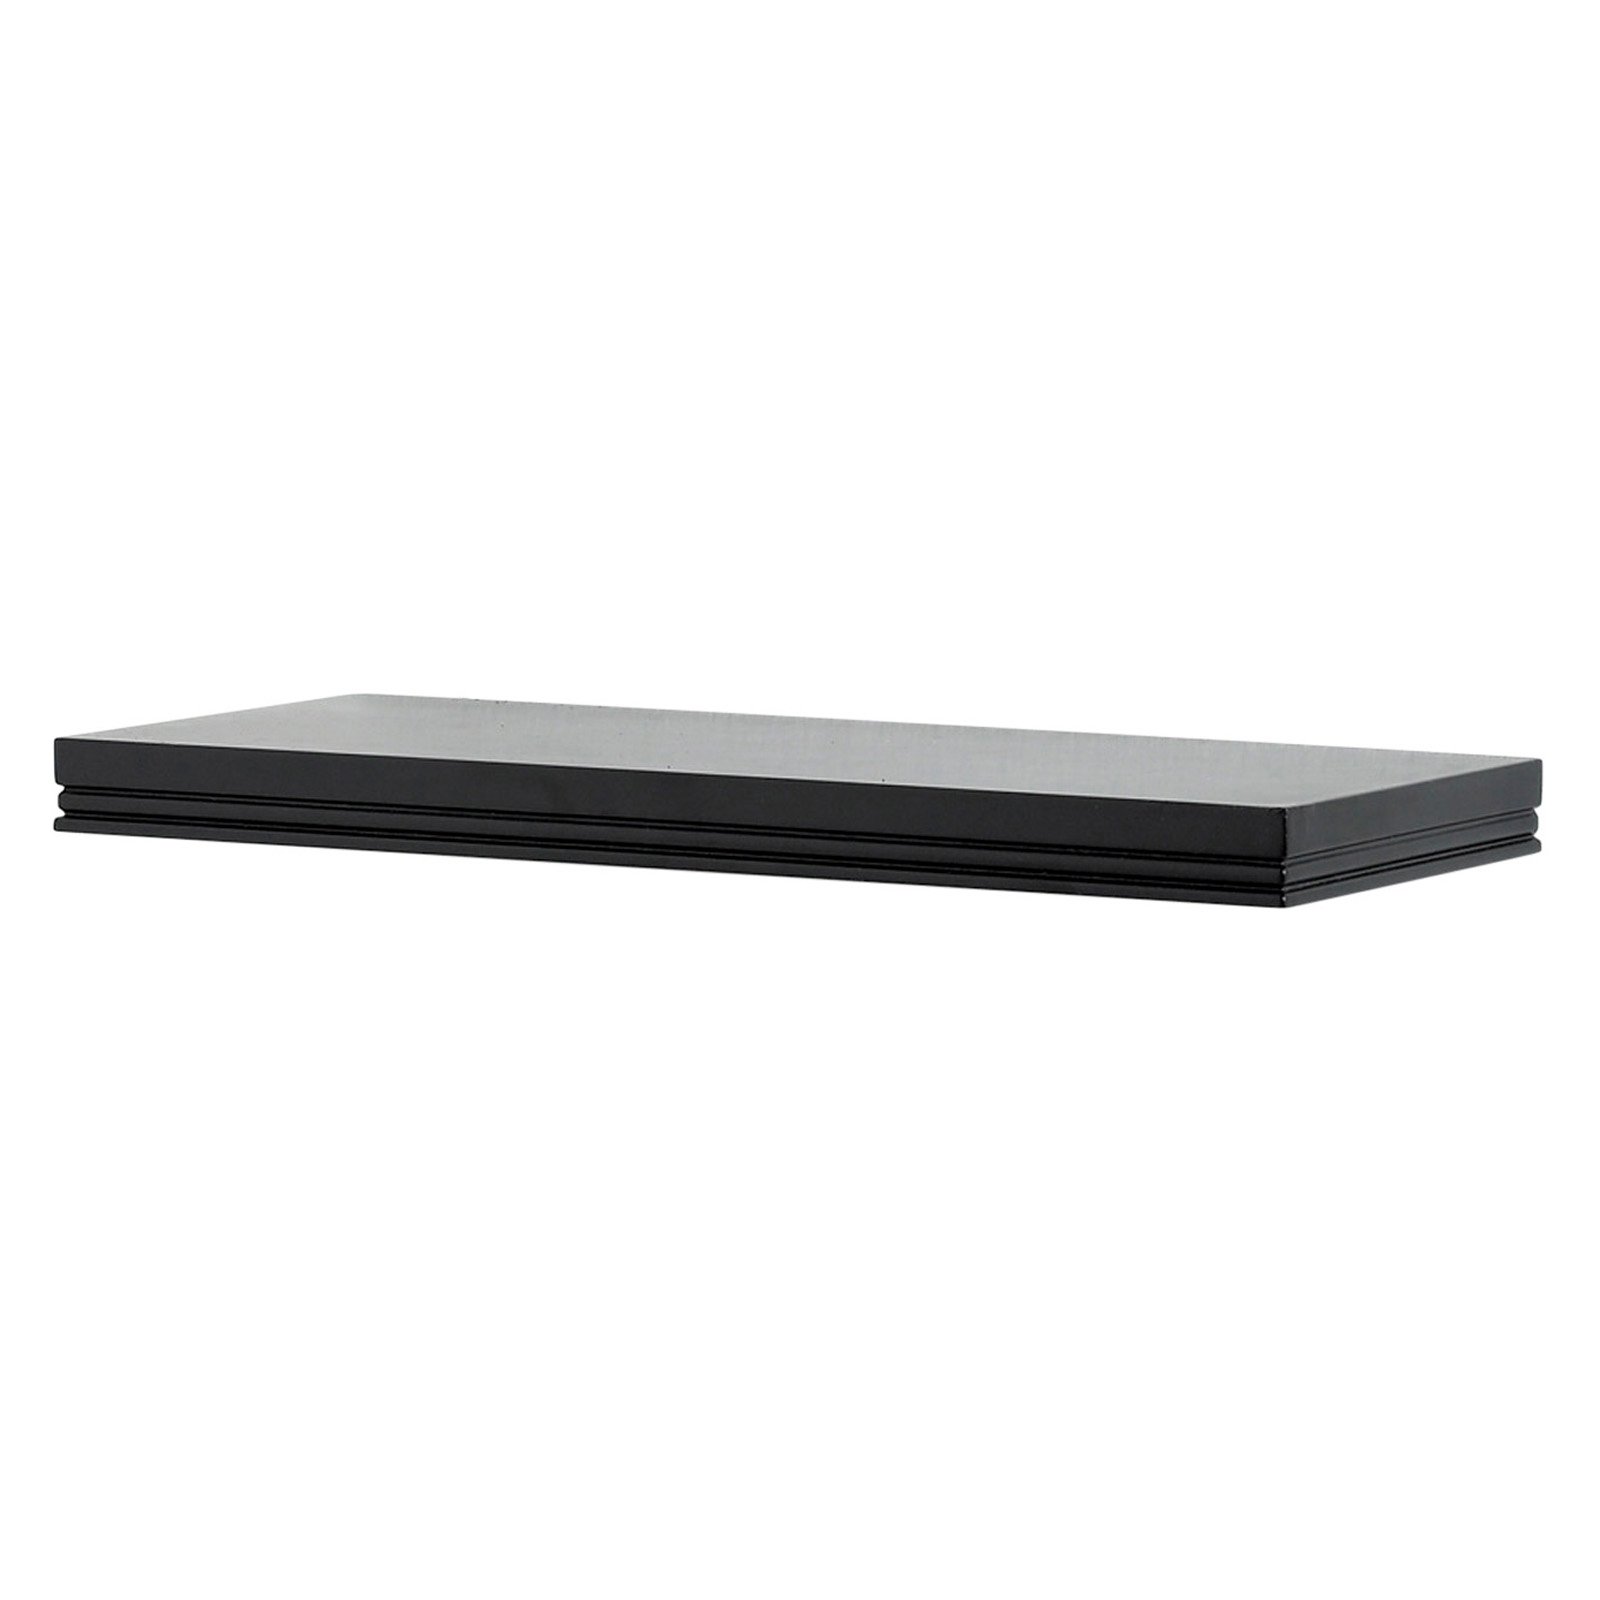 Warwick 10 in W x 8 in D x 1.25 in H Floating Wall Shelves, Set of 2, Black - image 1 of 4